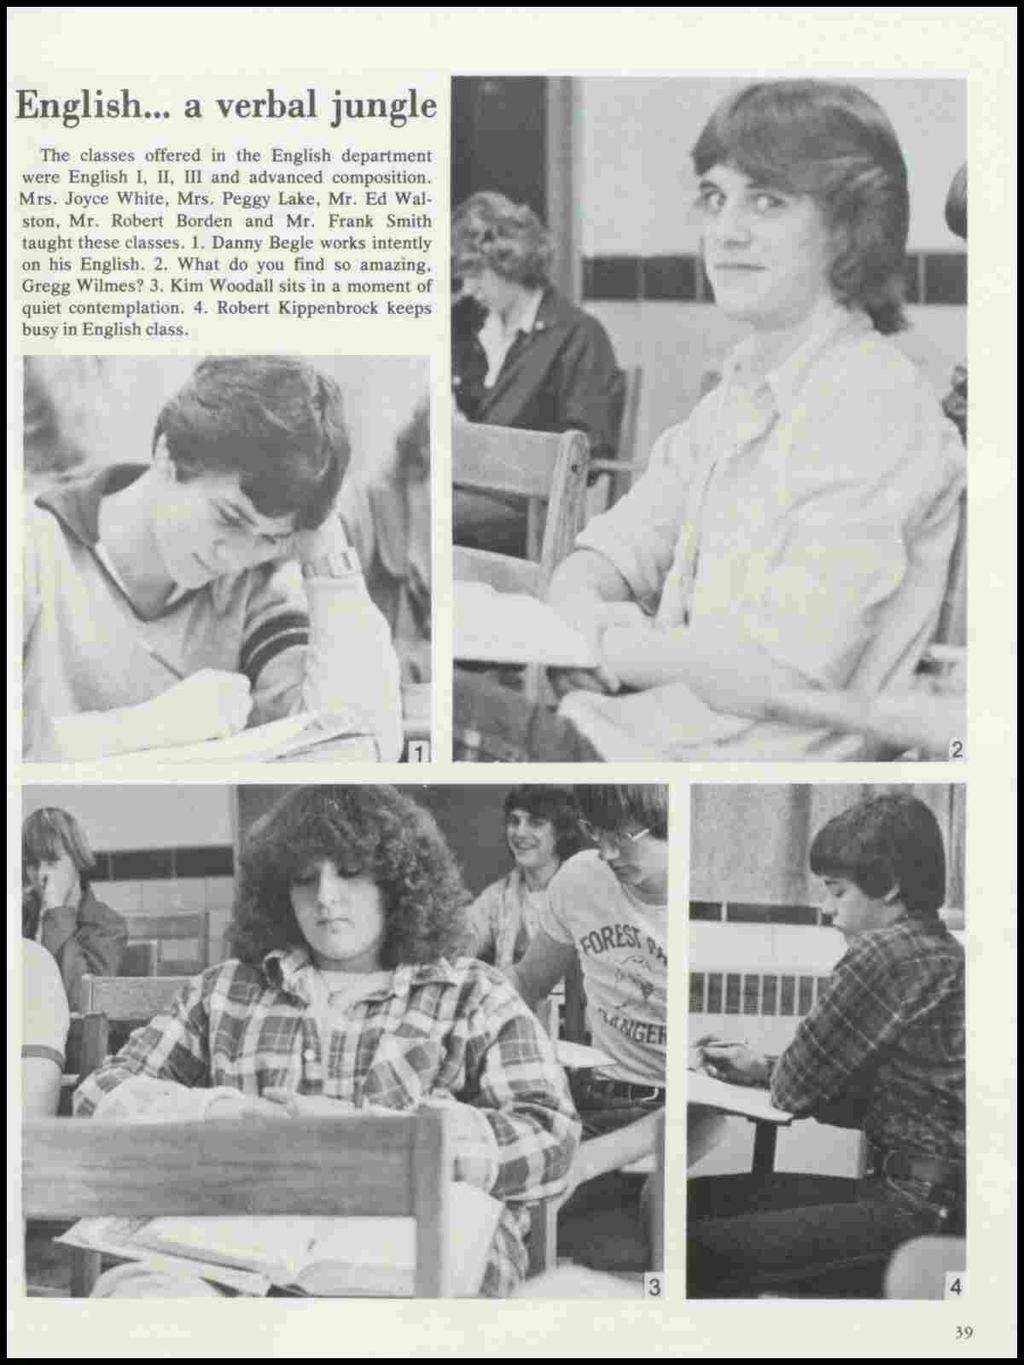 English... a verbal jungle The classes offered in the English department were English I, II, III and advanced composition. Mrs. Joyce White, Mrs. Peggy Lake, Mr. Ed Walston, Mr. Robert Borden and Mr.